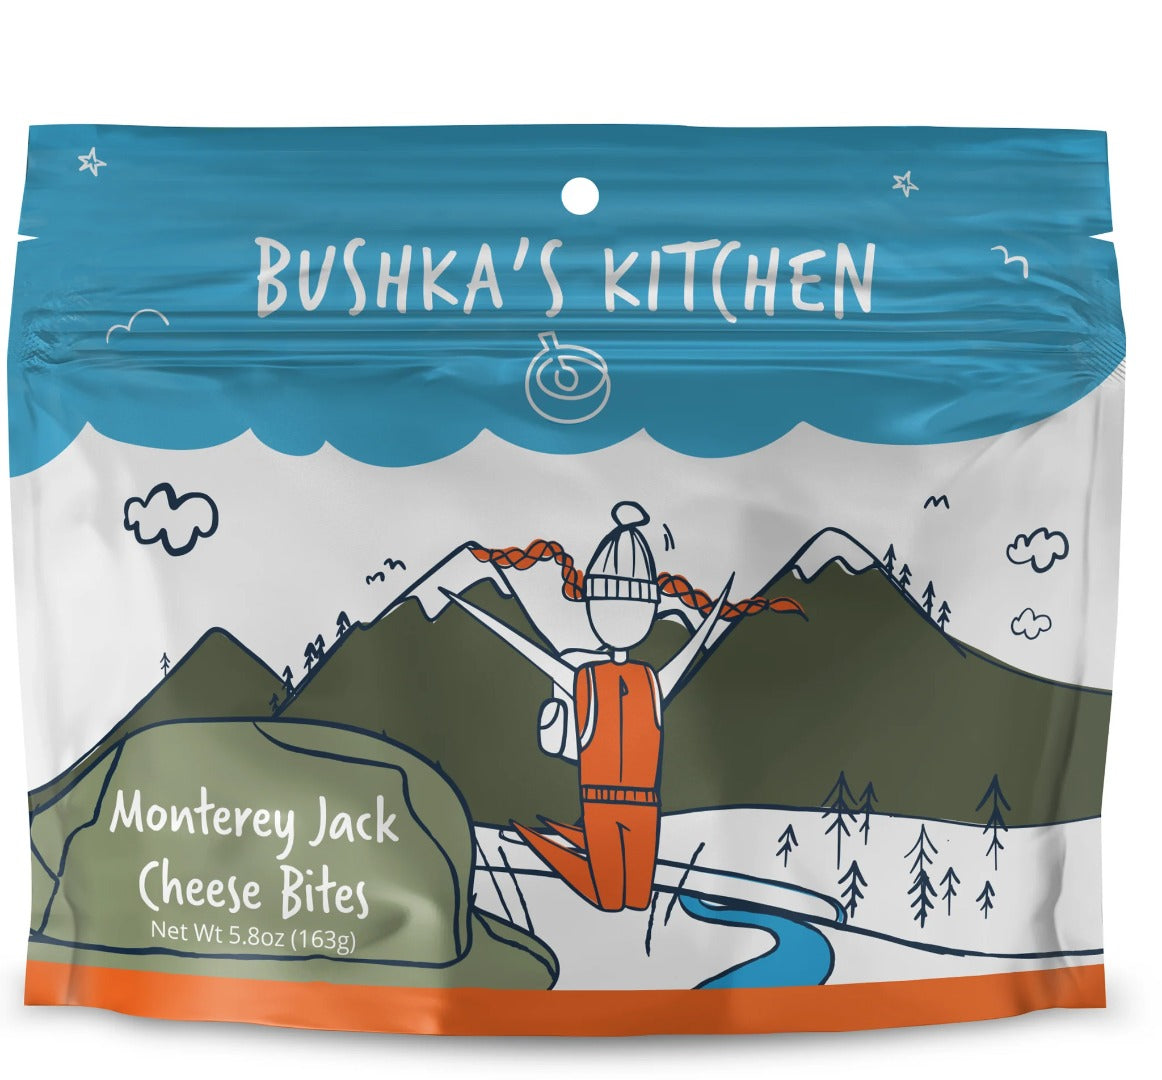 Bushka's Kitchen Monterey Jack Cheese Bites 10-Servings Freeze Dried Food Pouch